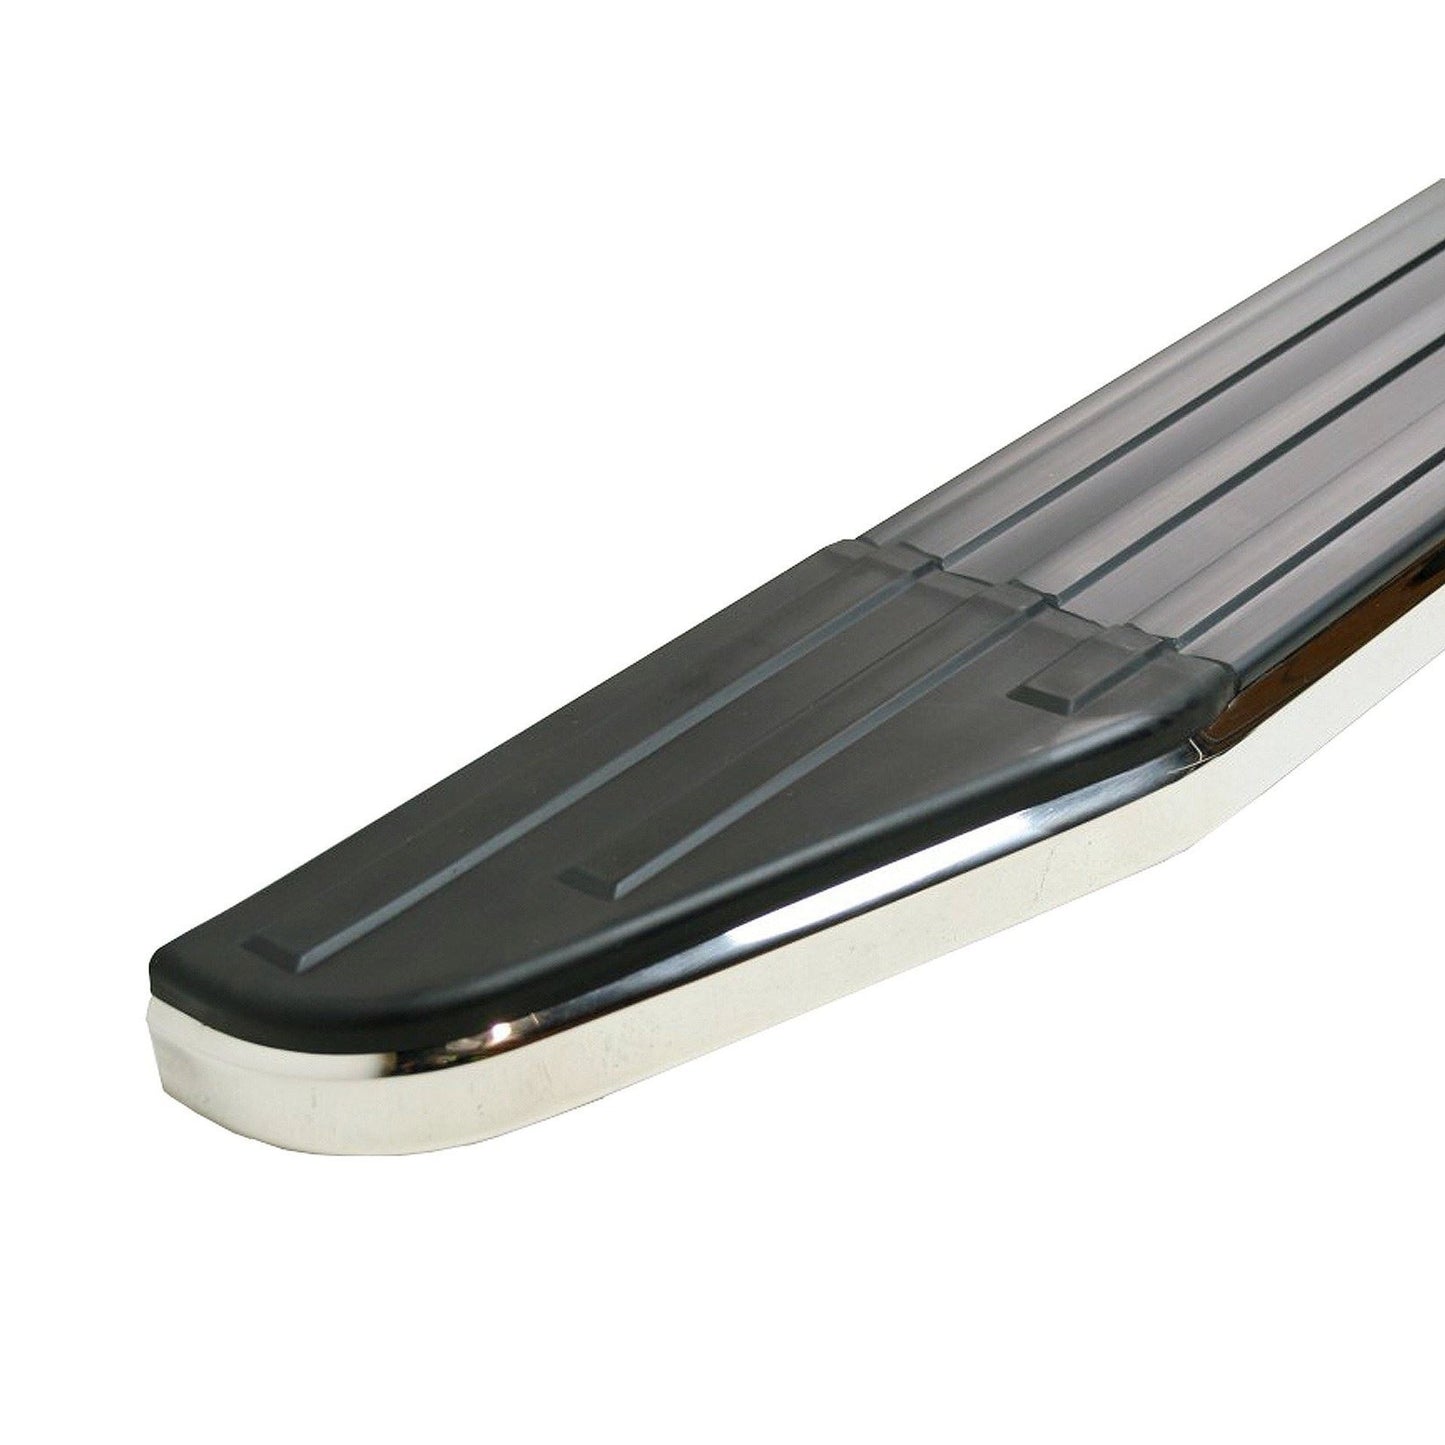 Raptor Side Steps Running Boards for Kia Sportage 2004-2010 -  - sold by Direct4x4